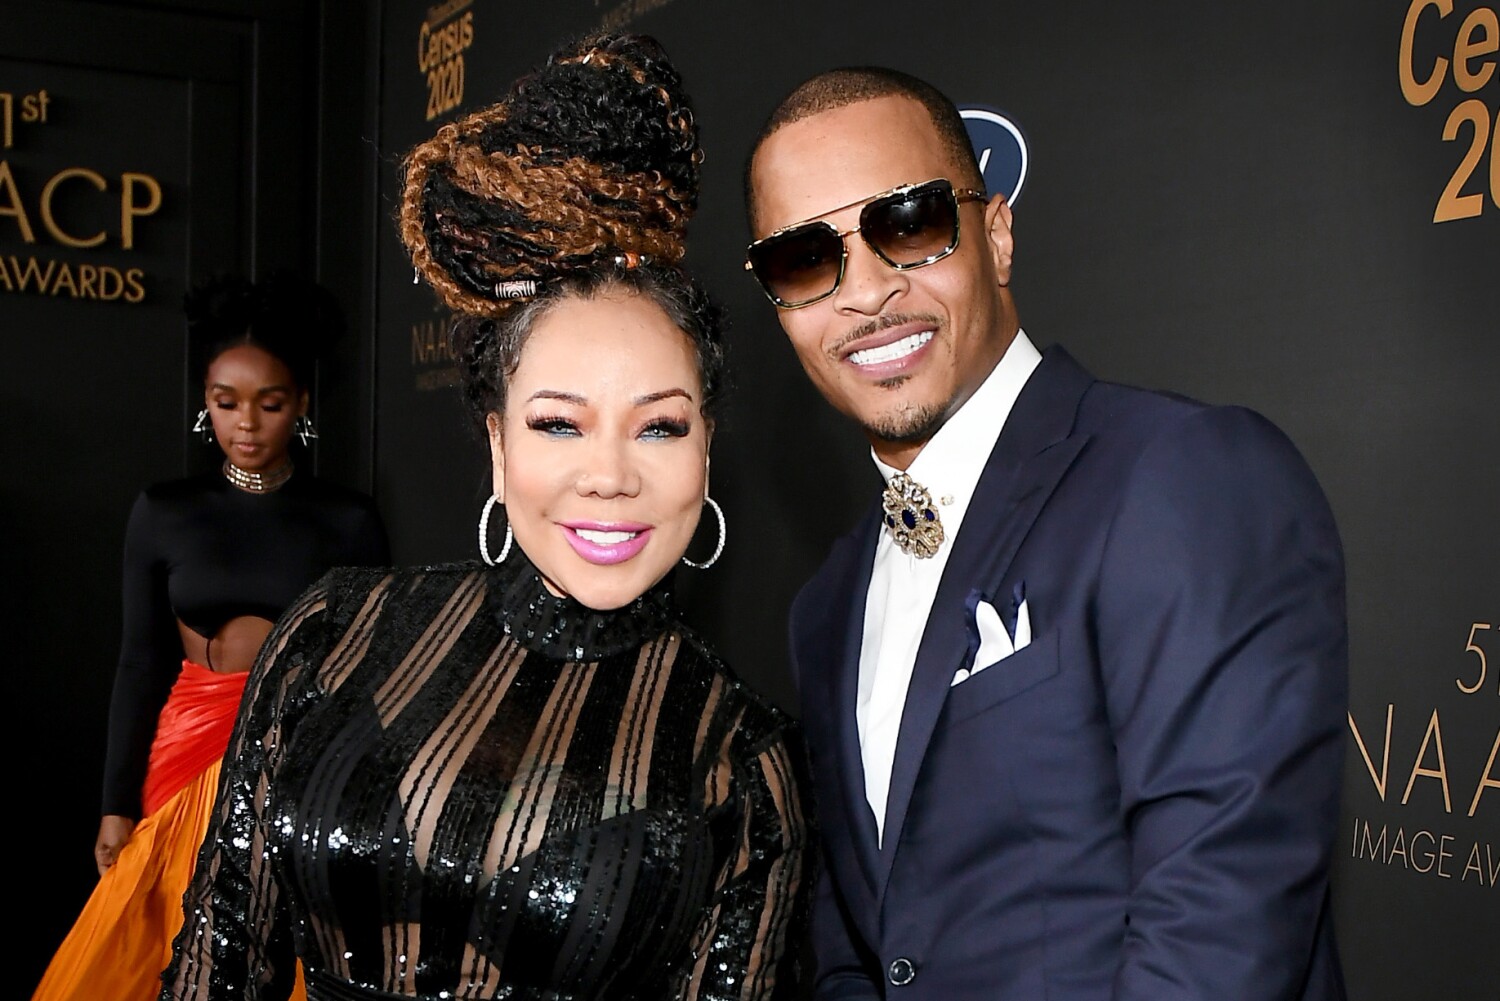 Rapper T.I. and wife Tiny won't face criminal charges over 2005 sex assault allegation, authorities say